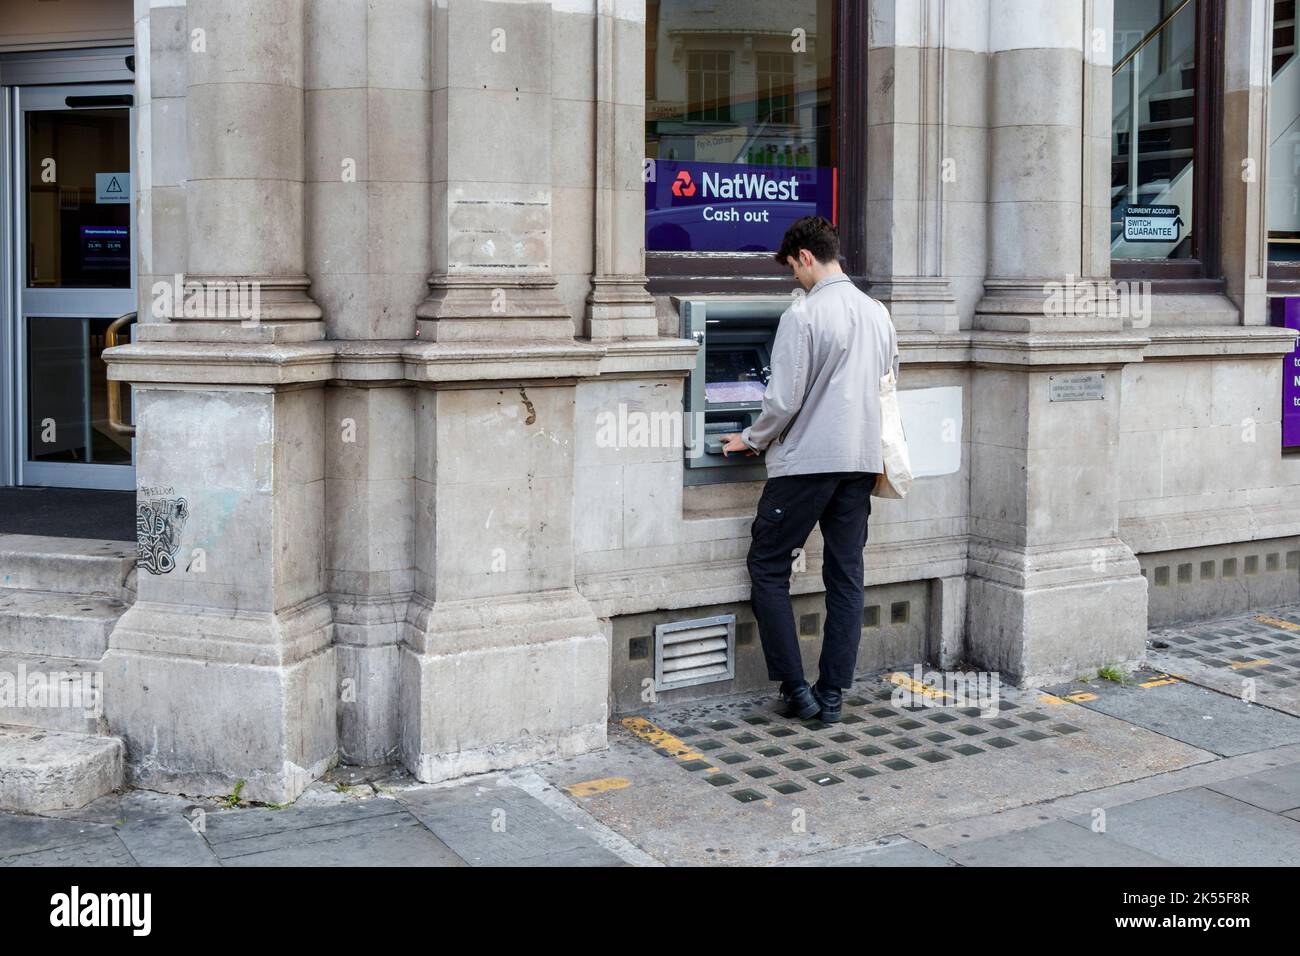 A man uses the ATM at a branch of NatWest bank in Camden Town, London, UK Stock Photo